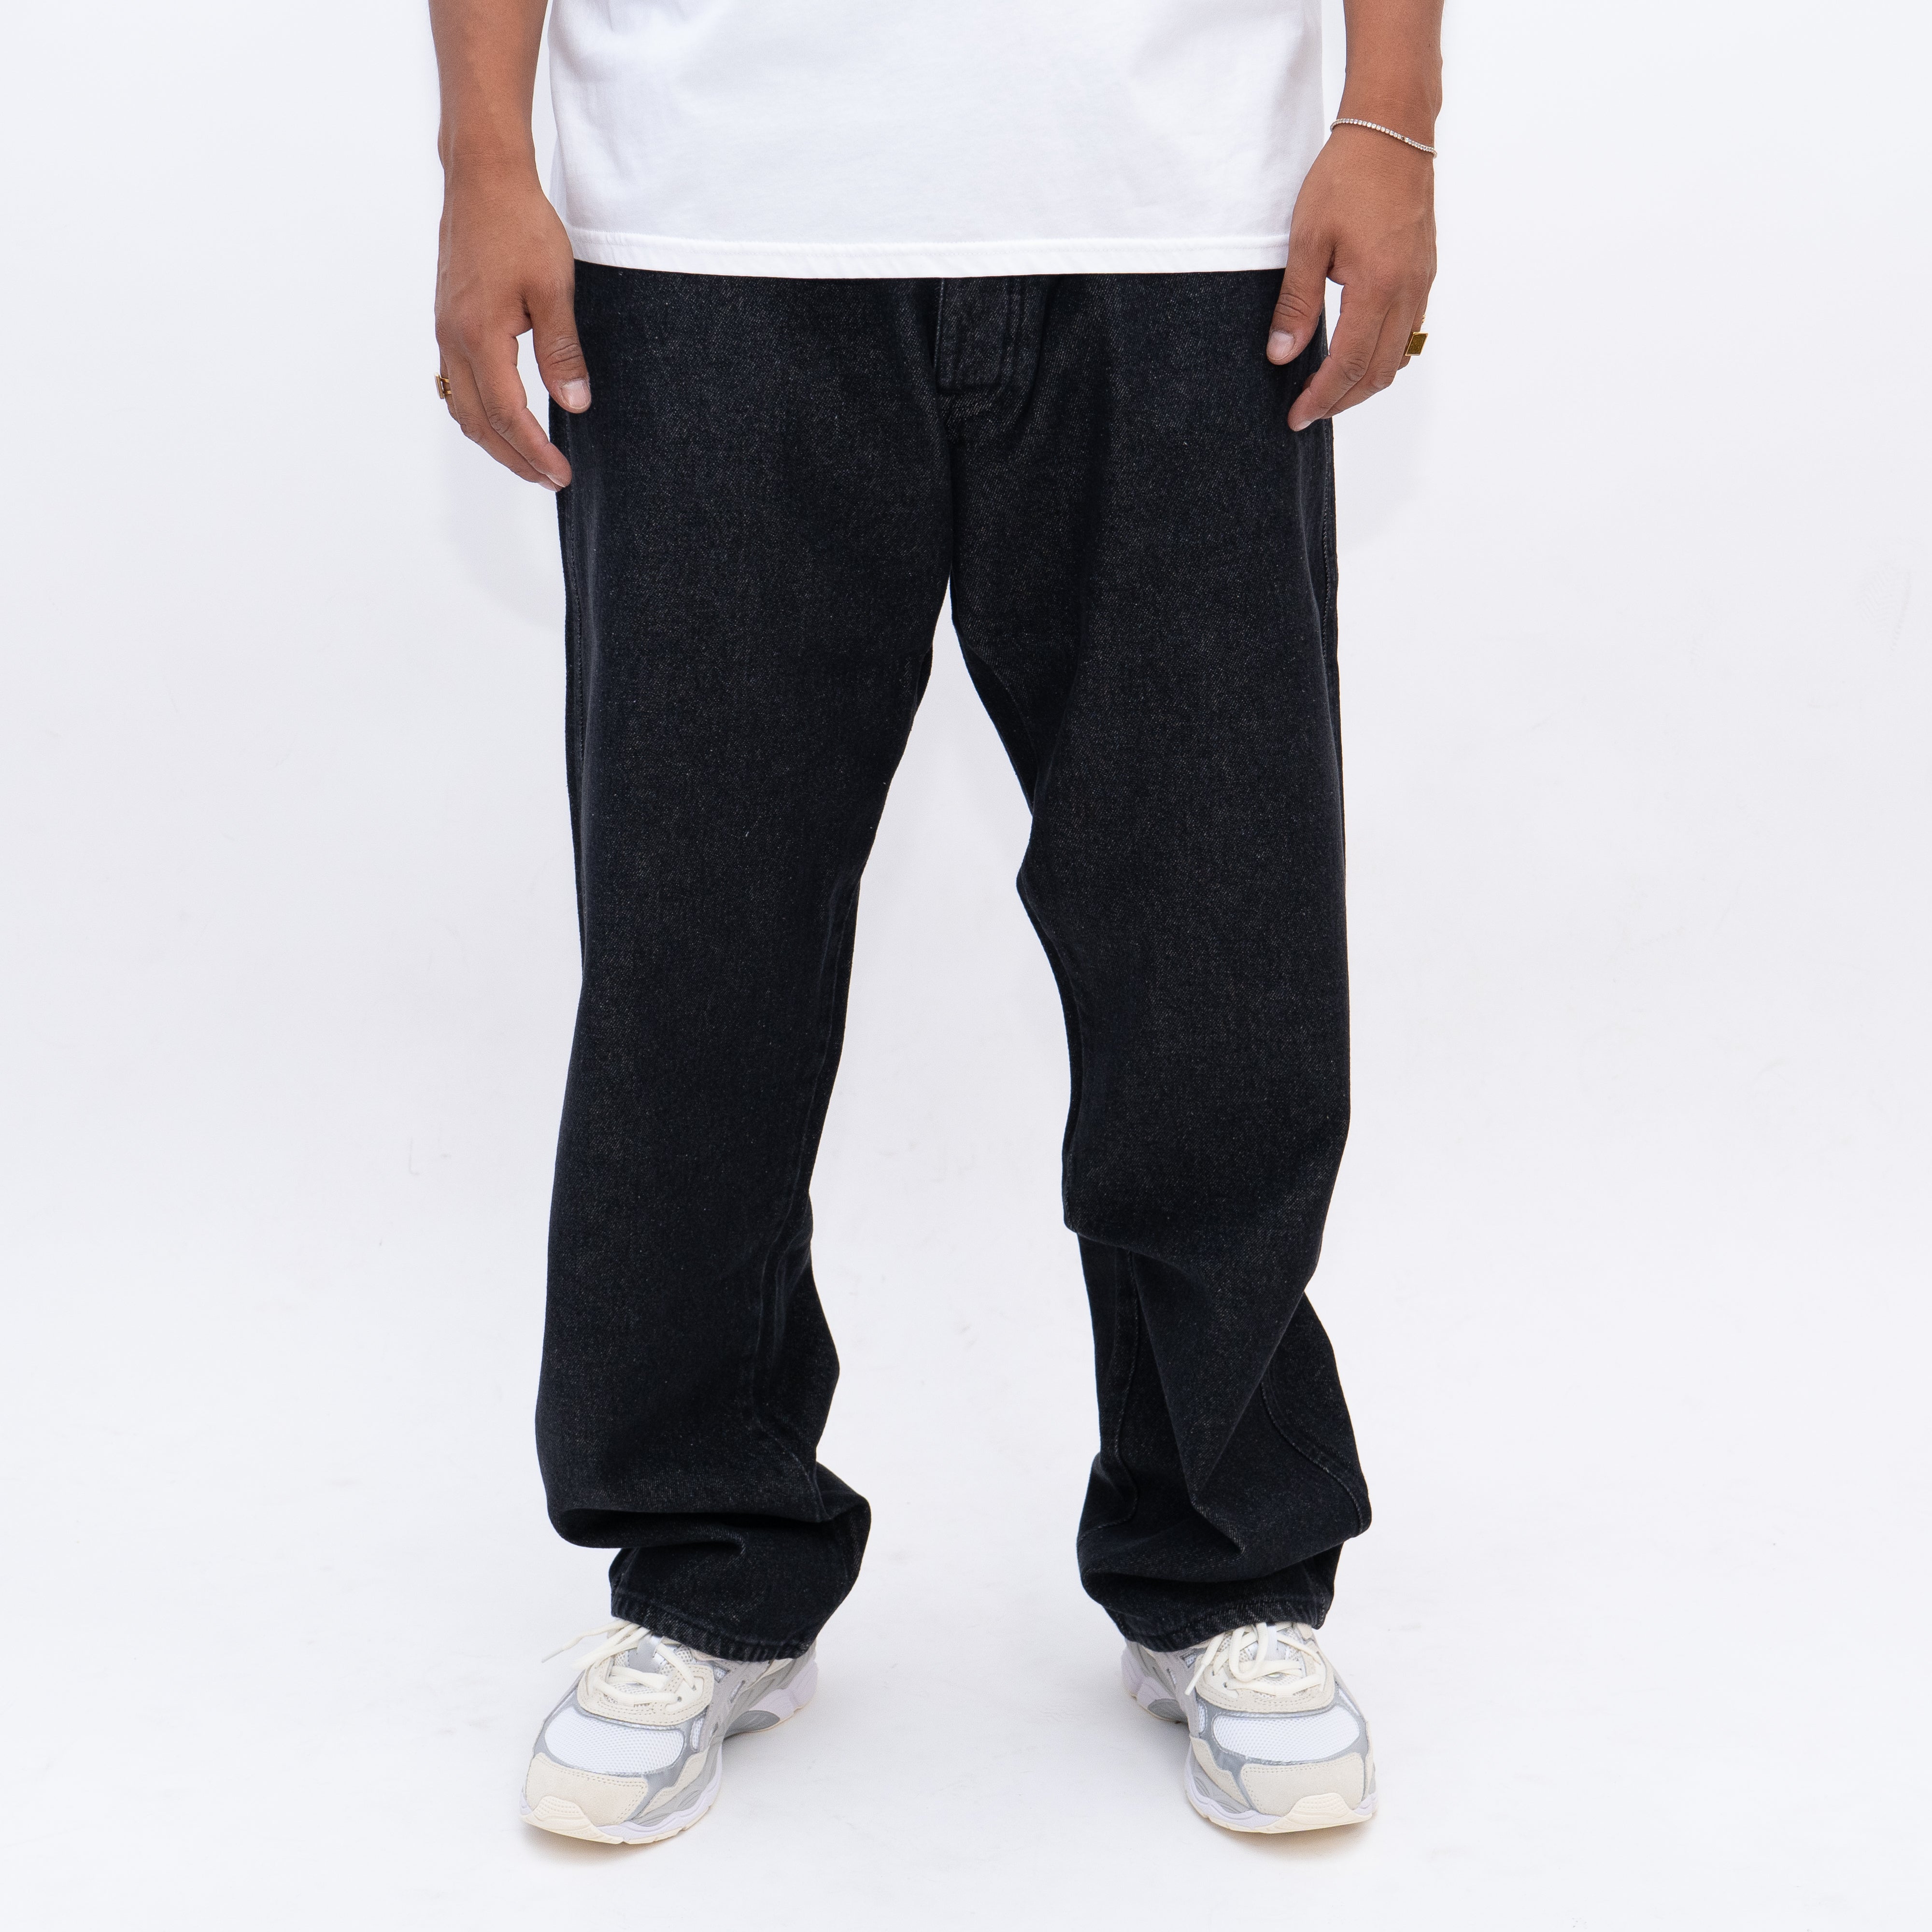 Baby Jeans Relaxed Fit Pants Black Rinsed